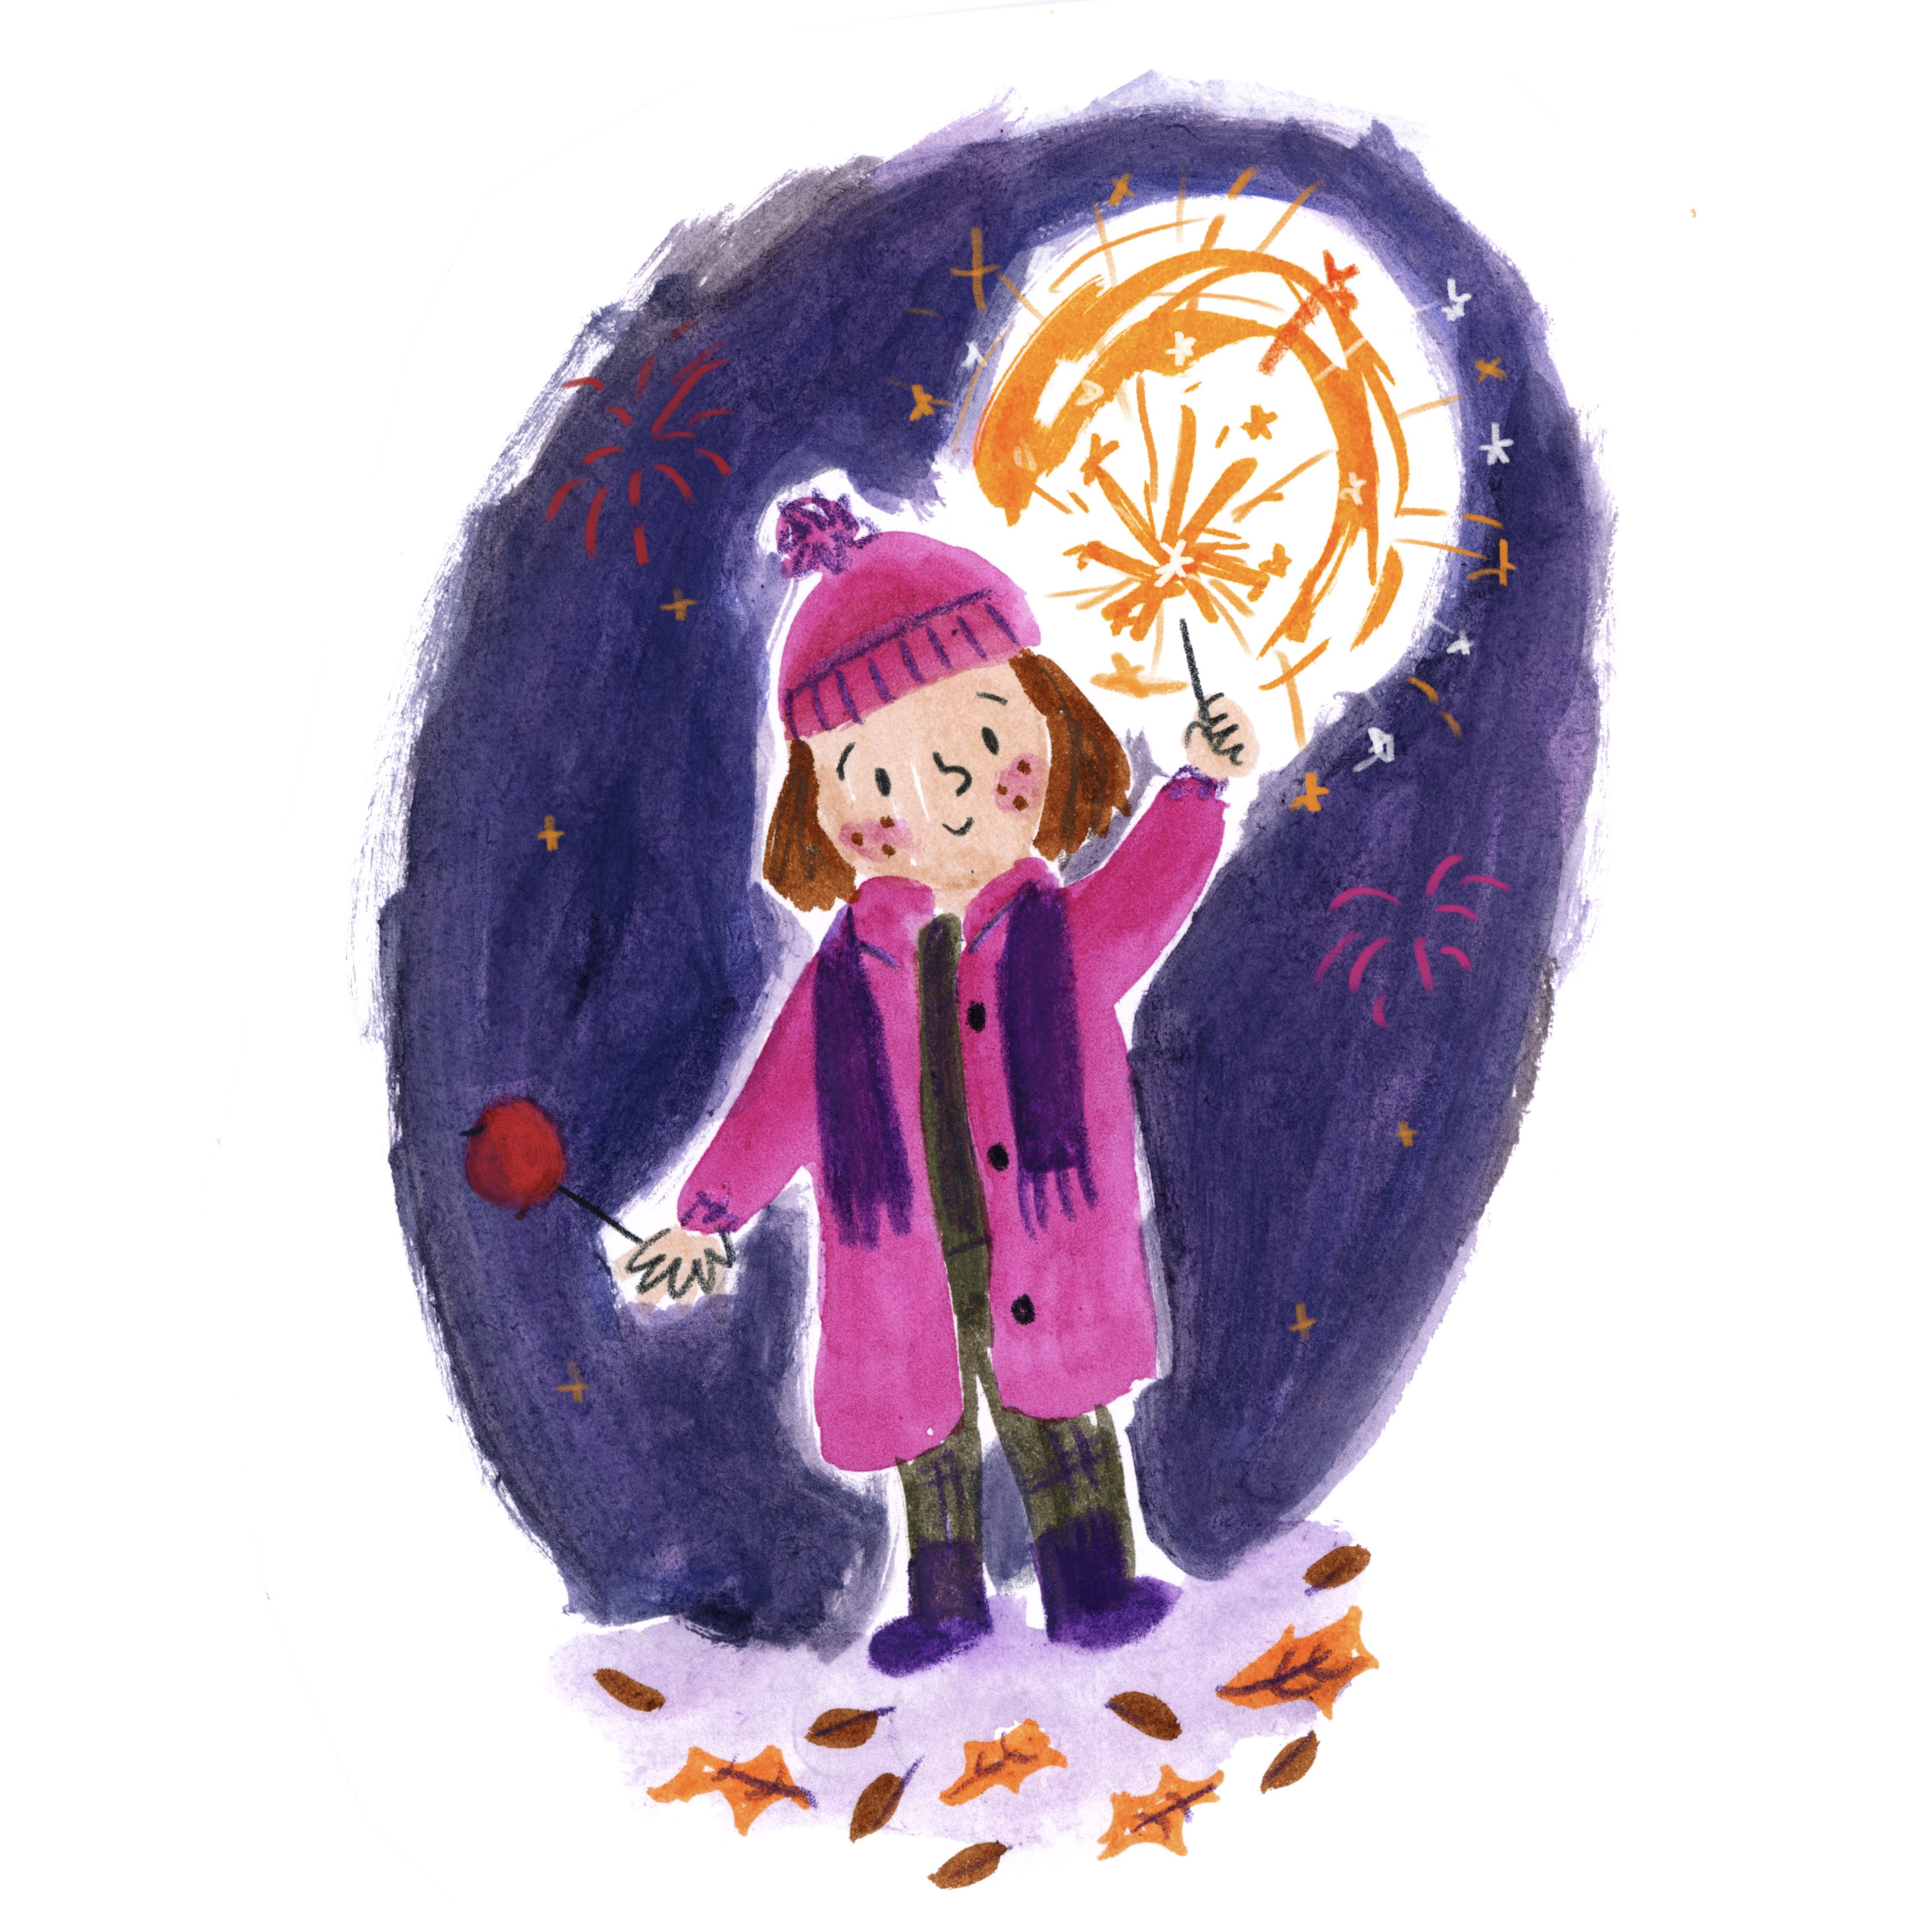 Girl with Sparkler Bonfire Night Lucy Dillamore Illustration.